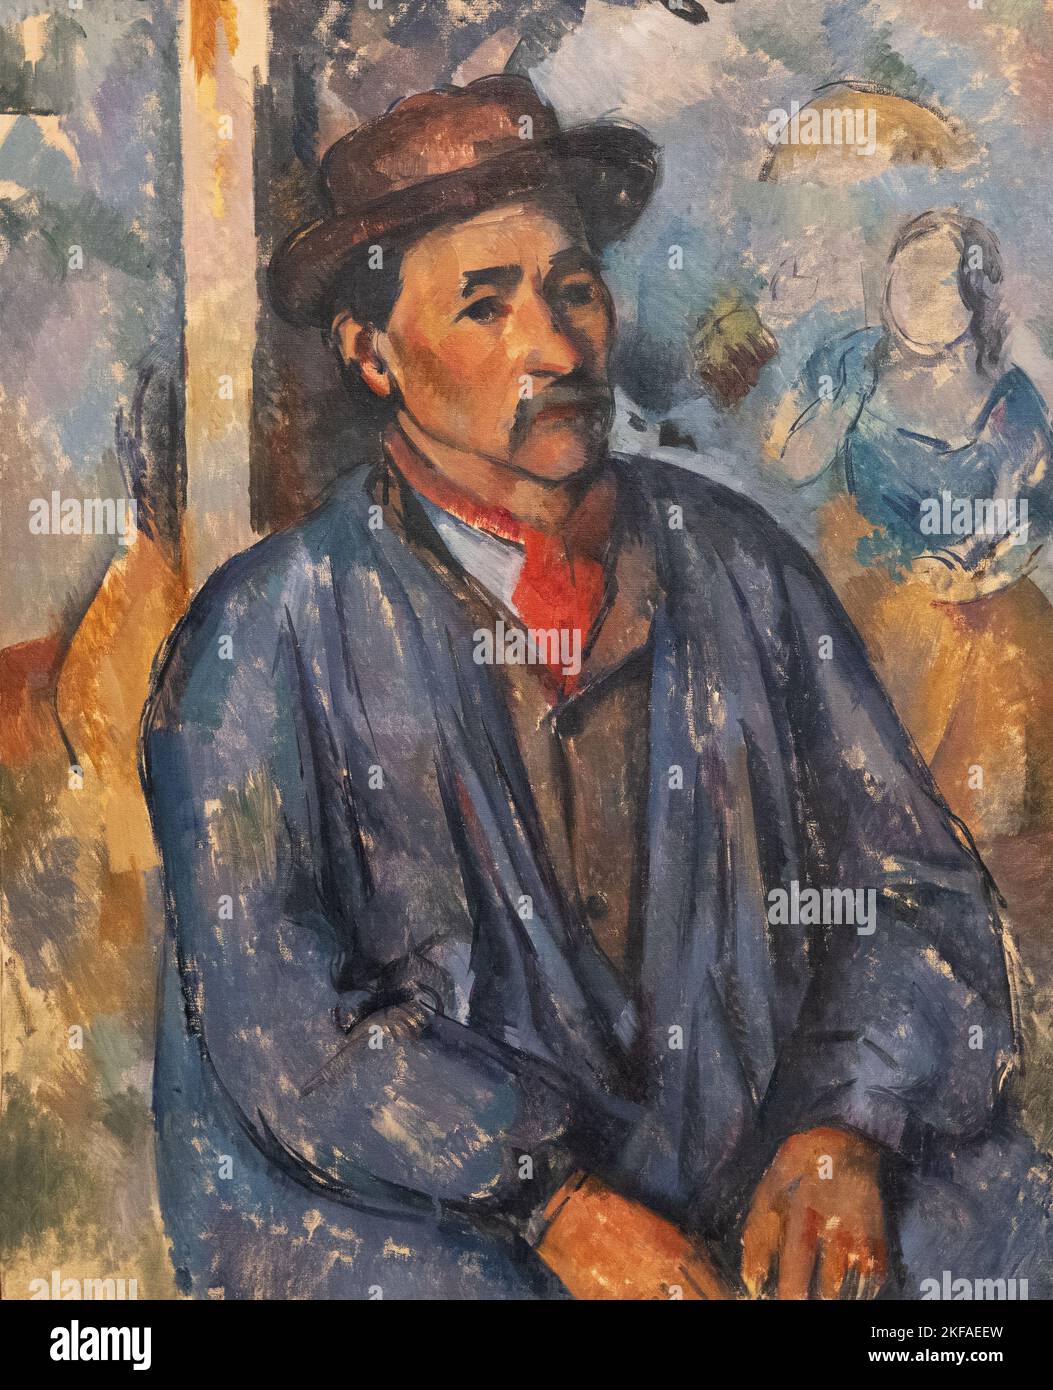 Paul Cezanne painting; Portrait of a Farm worker, Pere Alexandre, 1896-7; Oil painting, Post-Impressionism, 19th century. Stock Photo